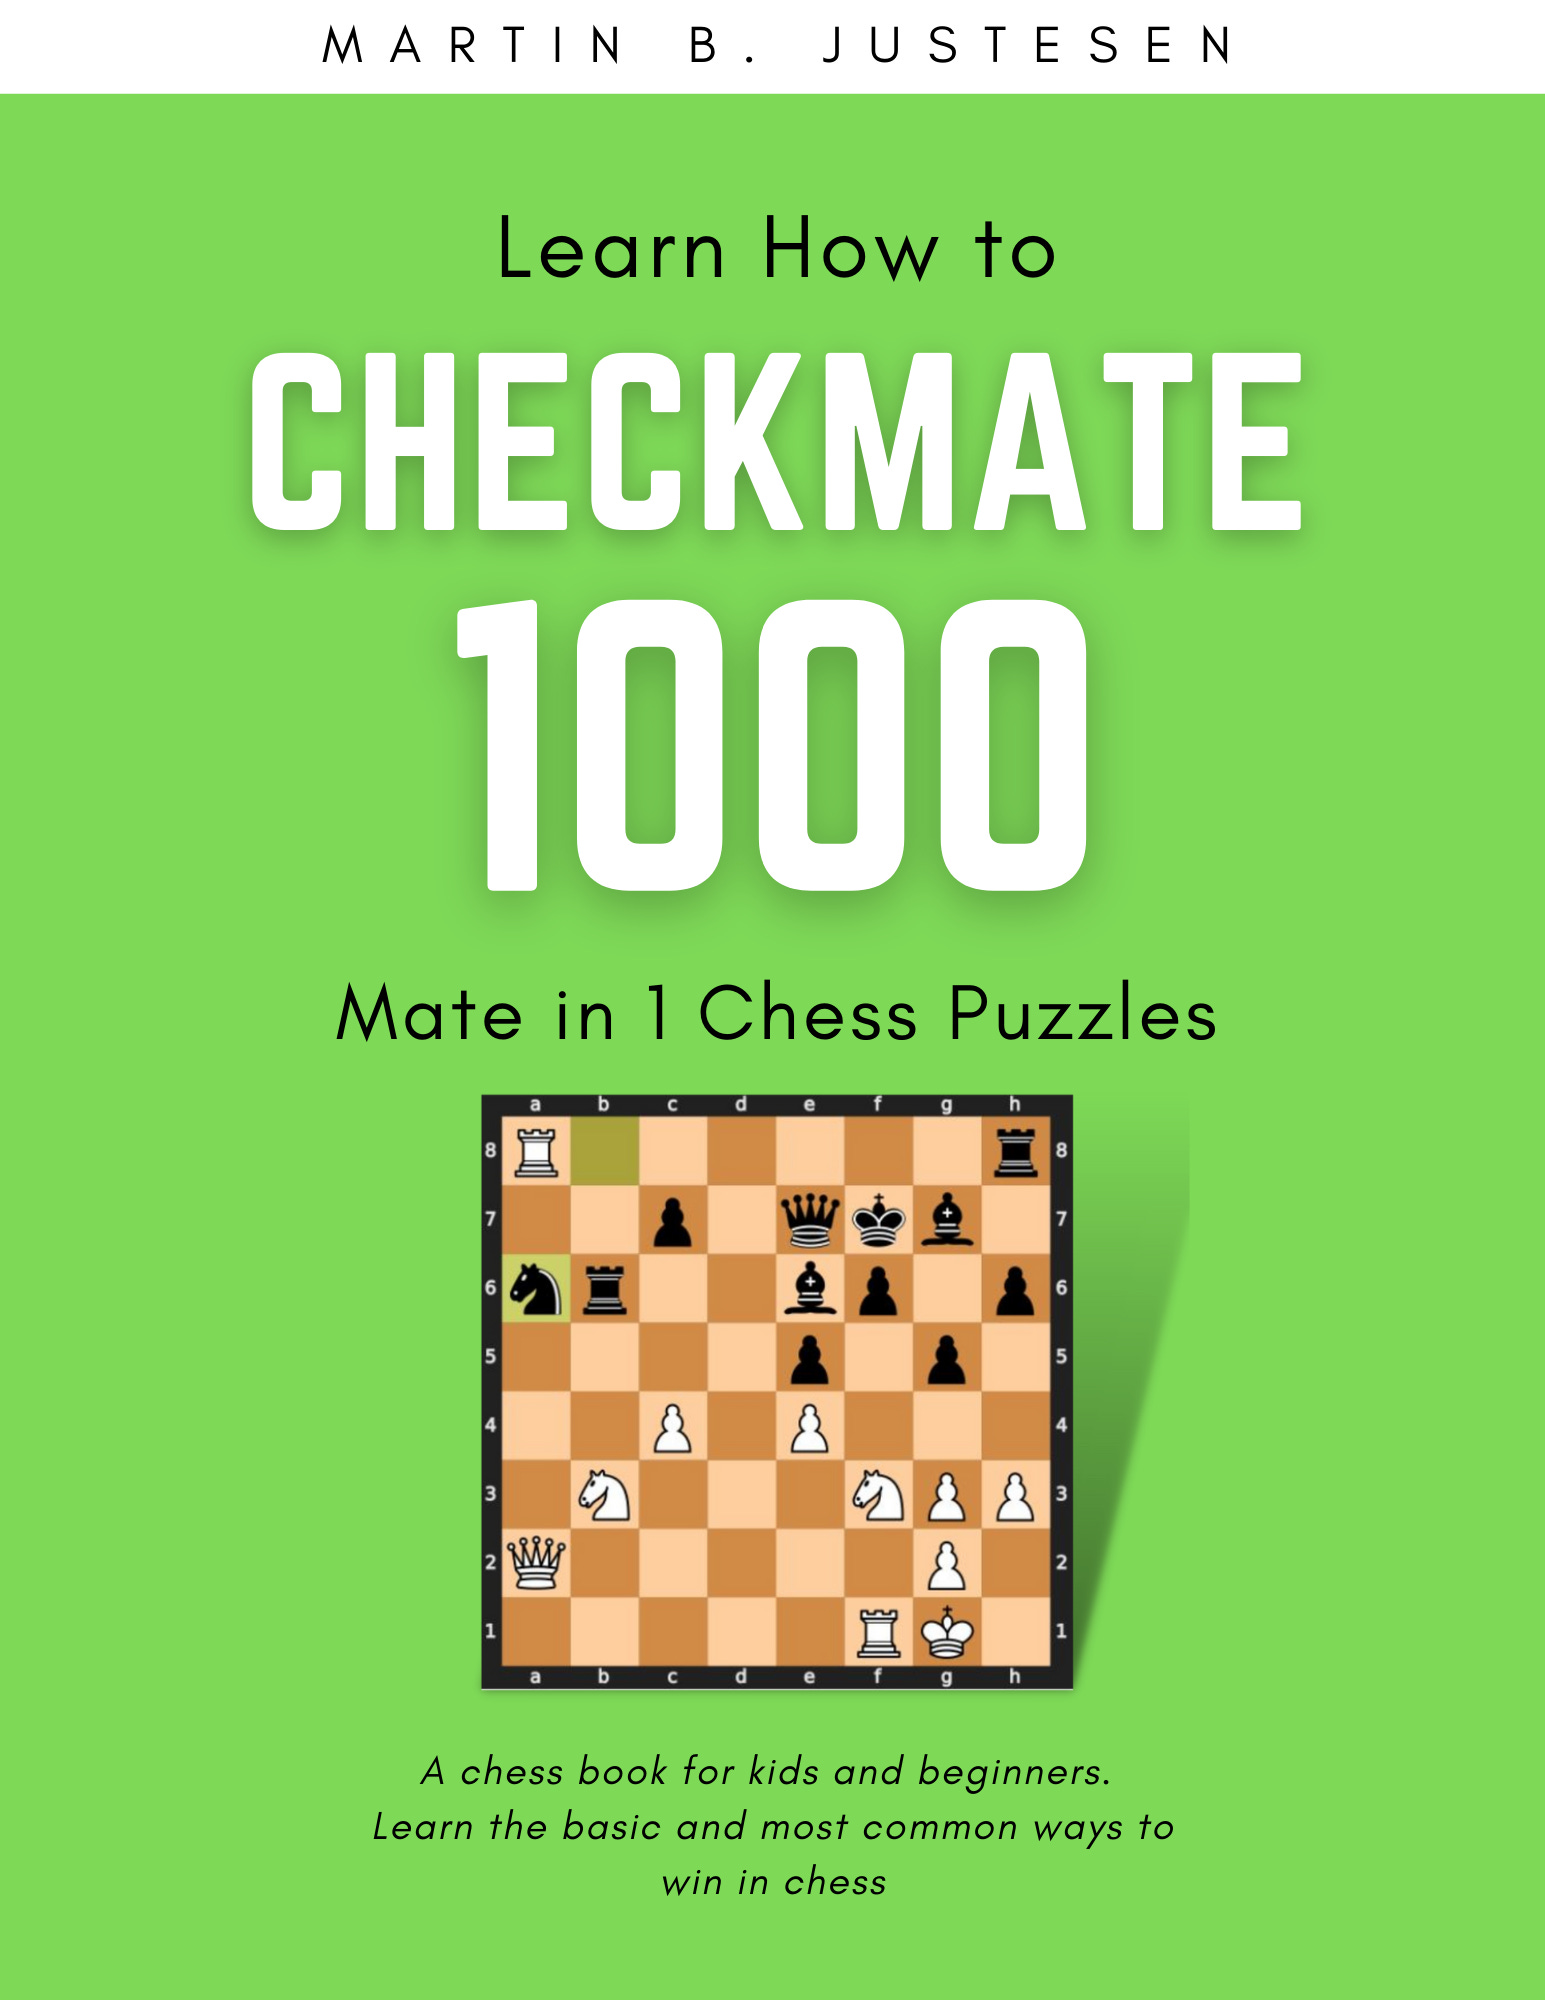 New Book for complete beginners and 'My Chess Career', part V